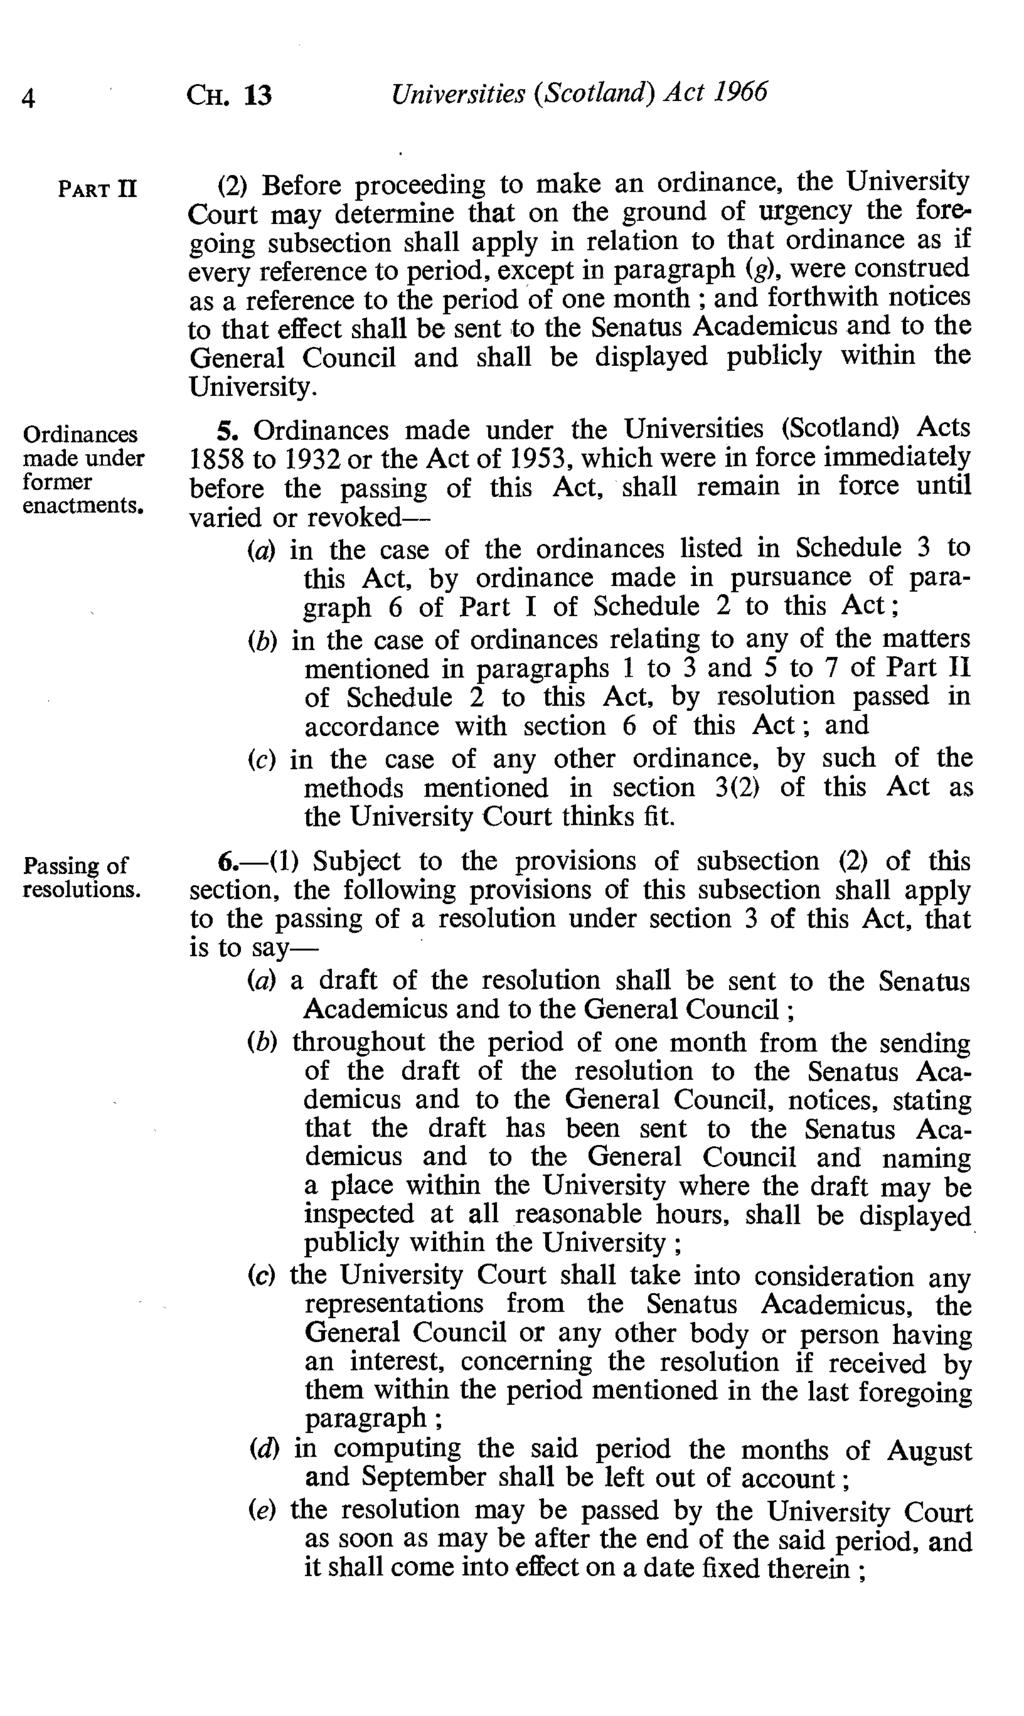 4 CH. 13 Universities (Scotland) Act 1966 PART R Ordinances made under former enactments. Passing of resolutions.